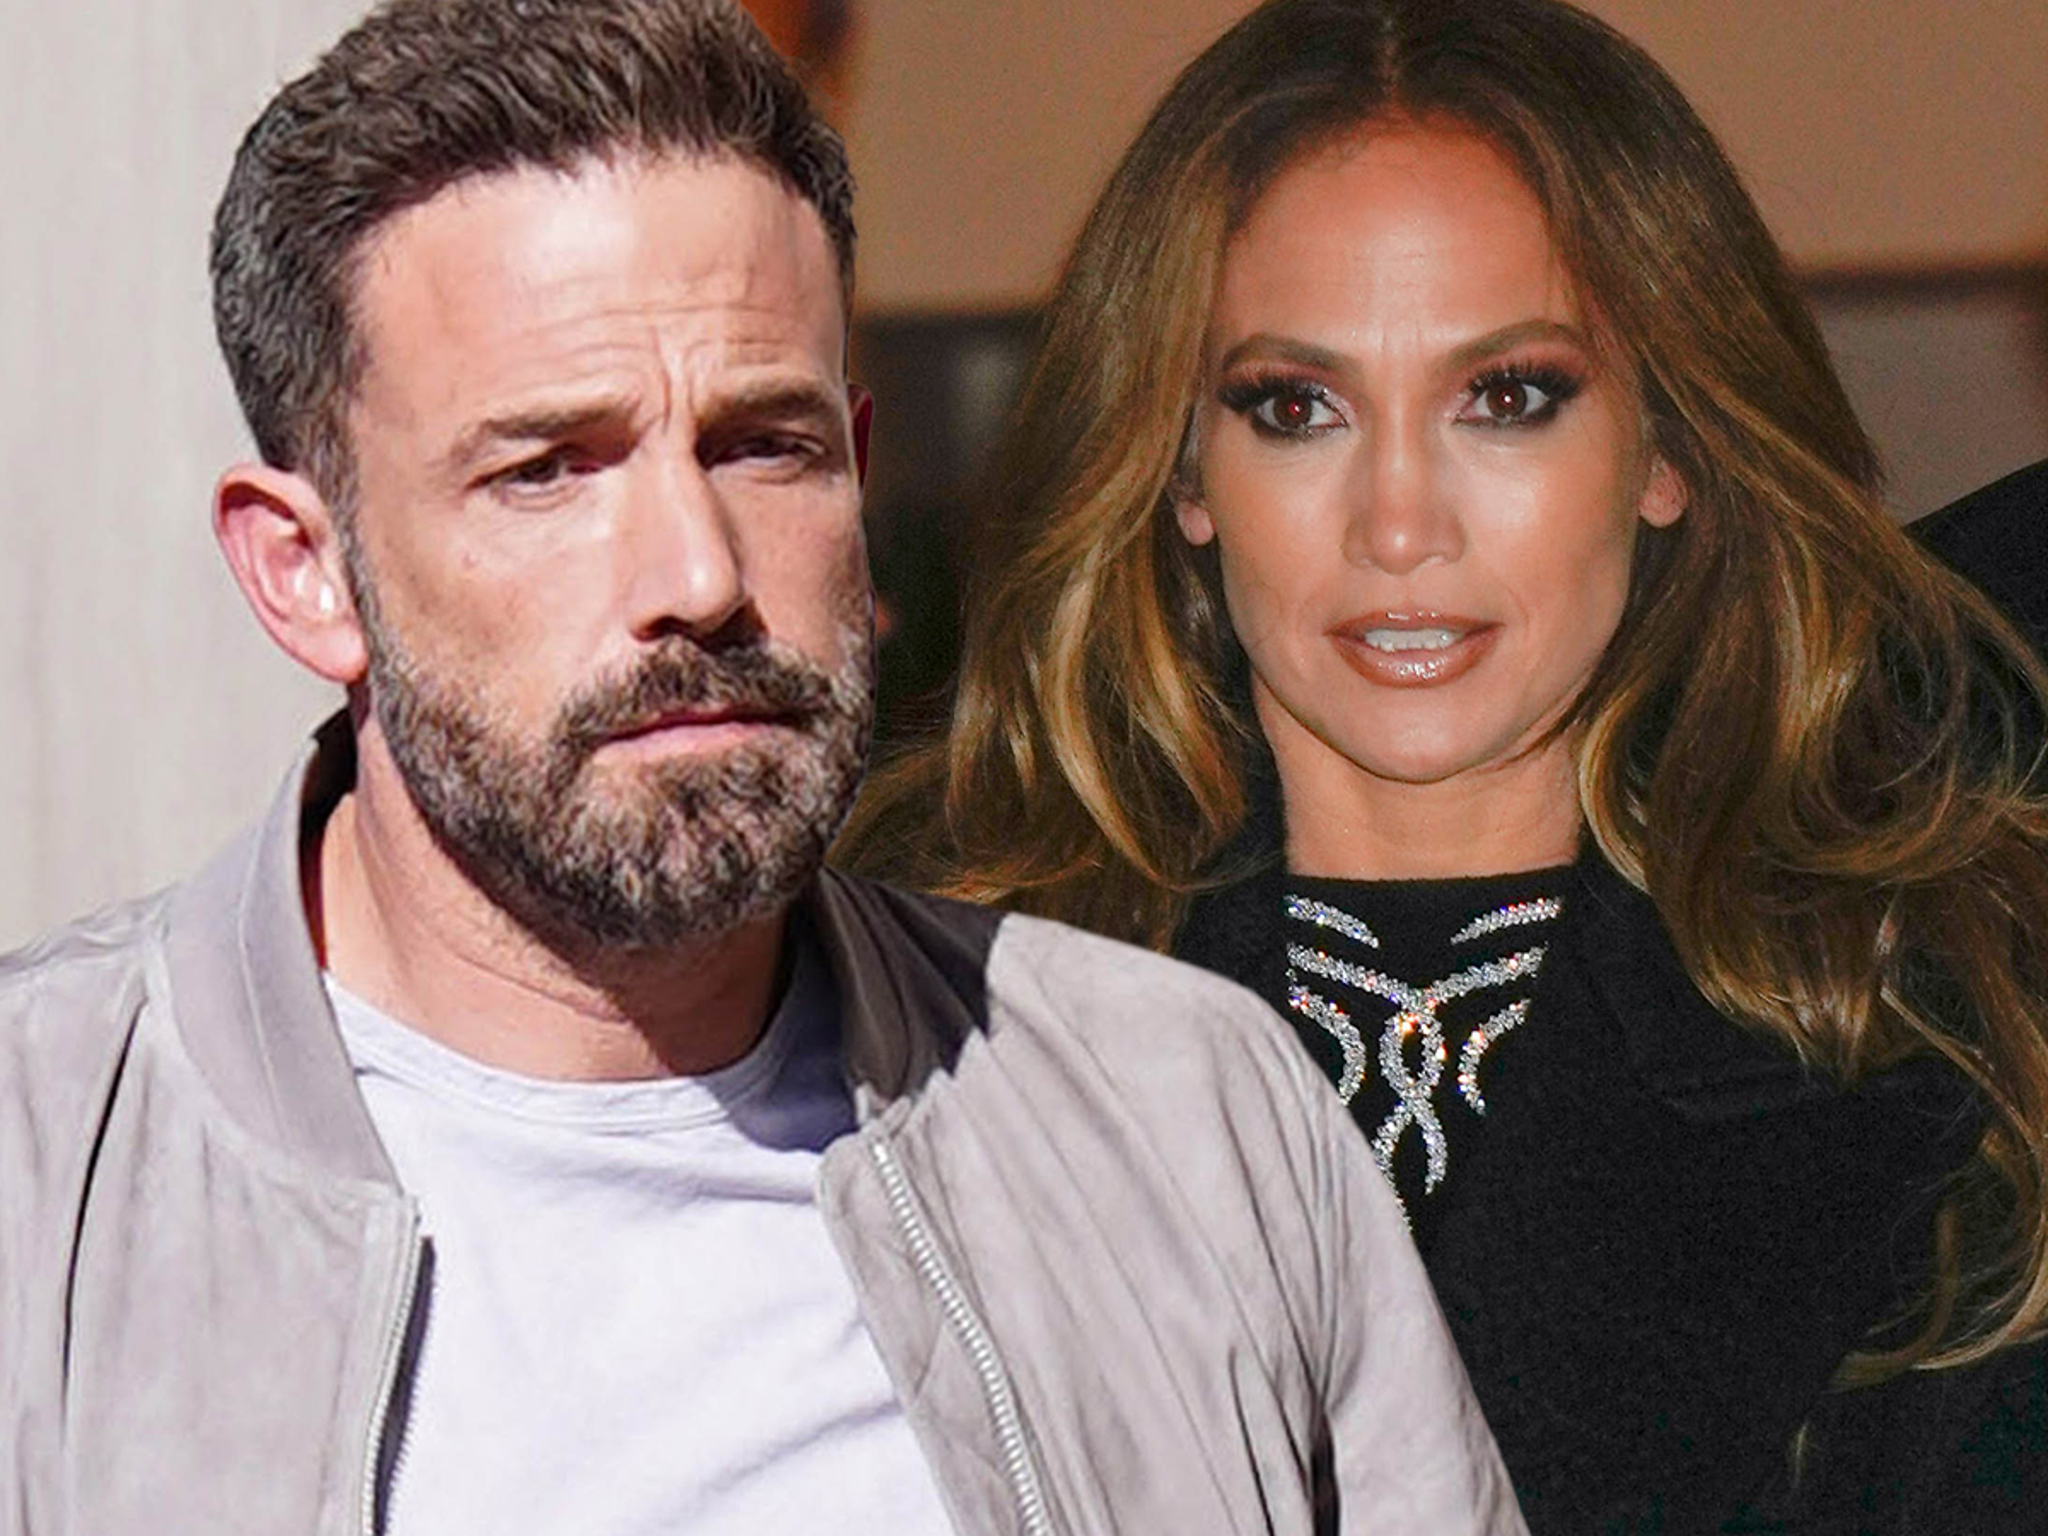 Ben Affleck's New Movie Bombs in Theaters, J Lo's Soars on Netflix